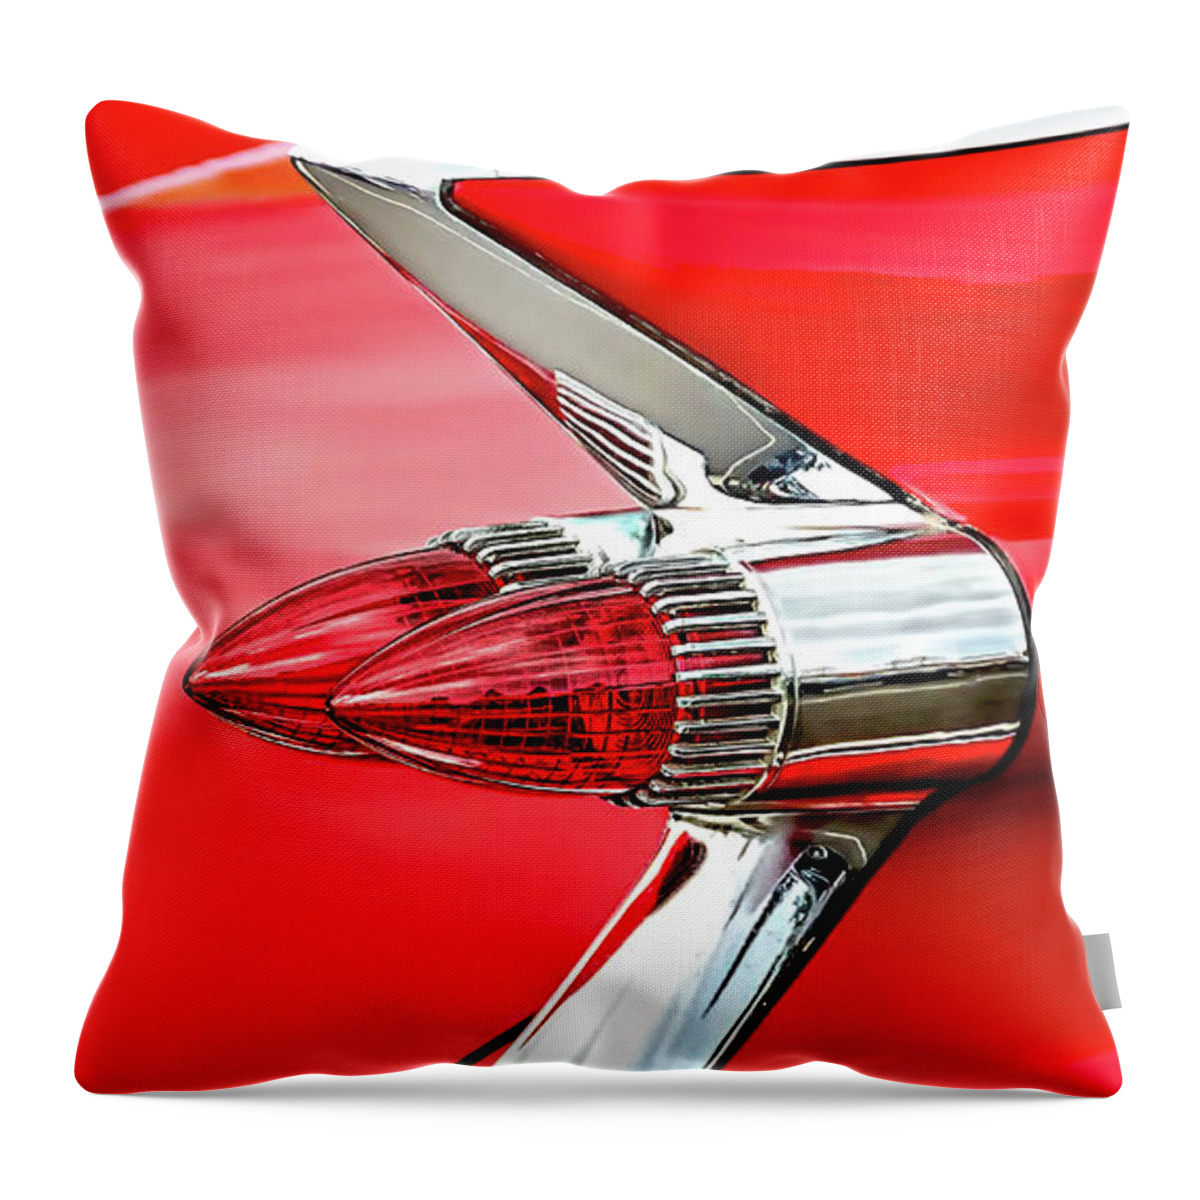 David Lawson Photography Throw Pillow featuring the photograph Caddy Delight by David Lawson